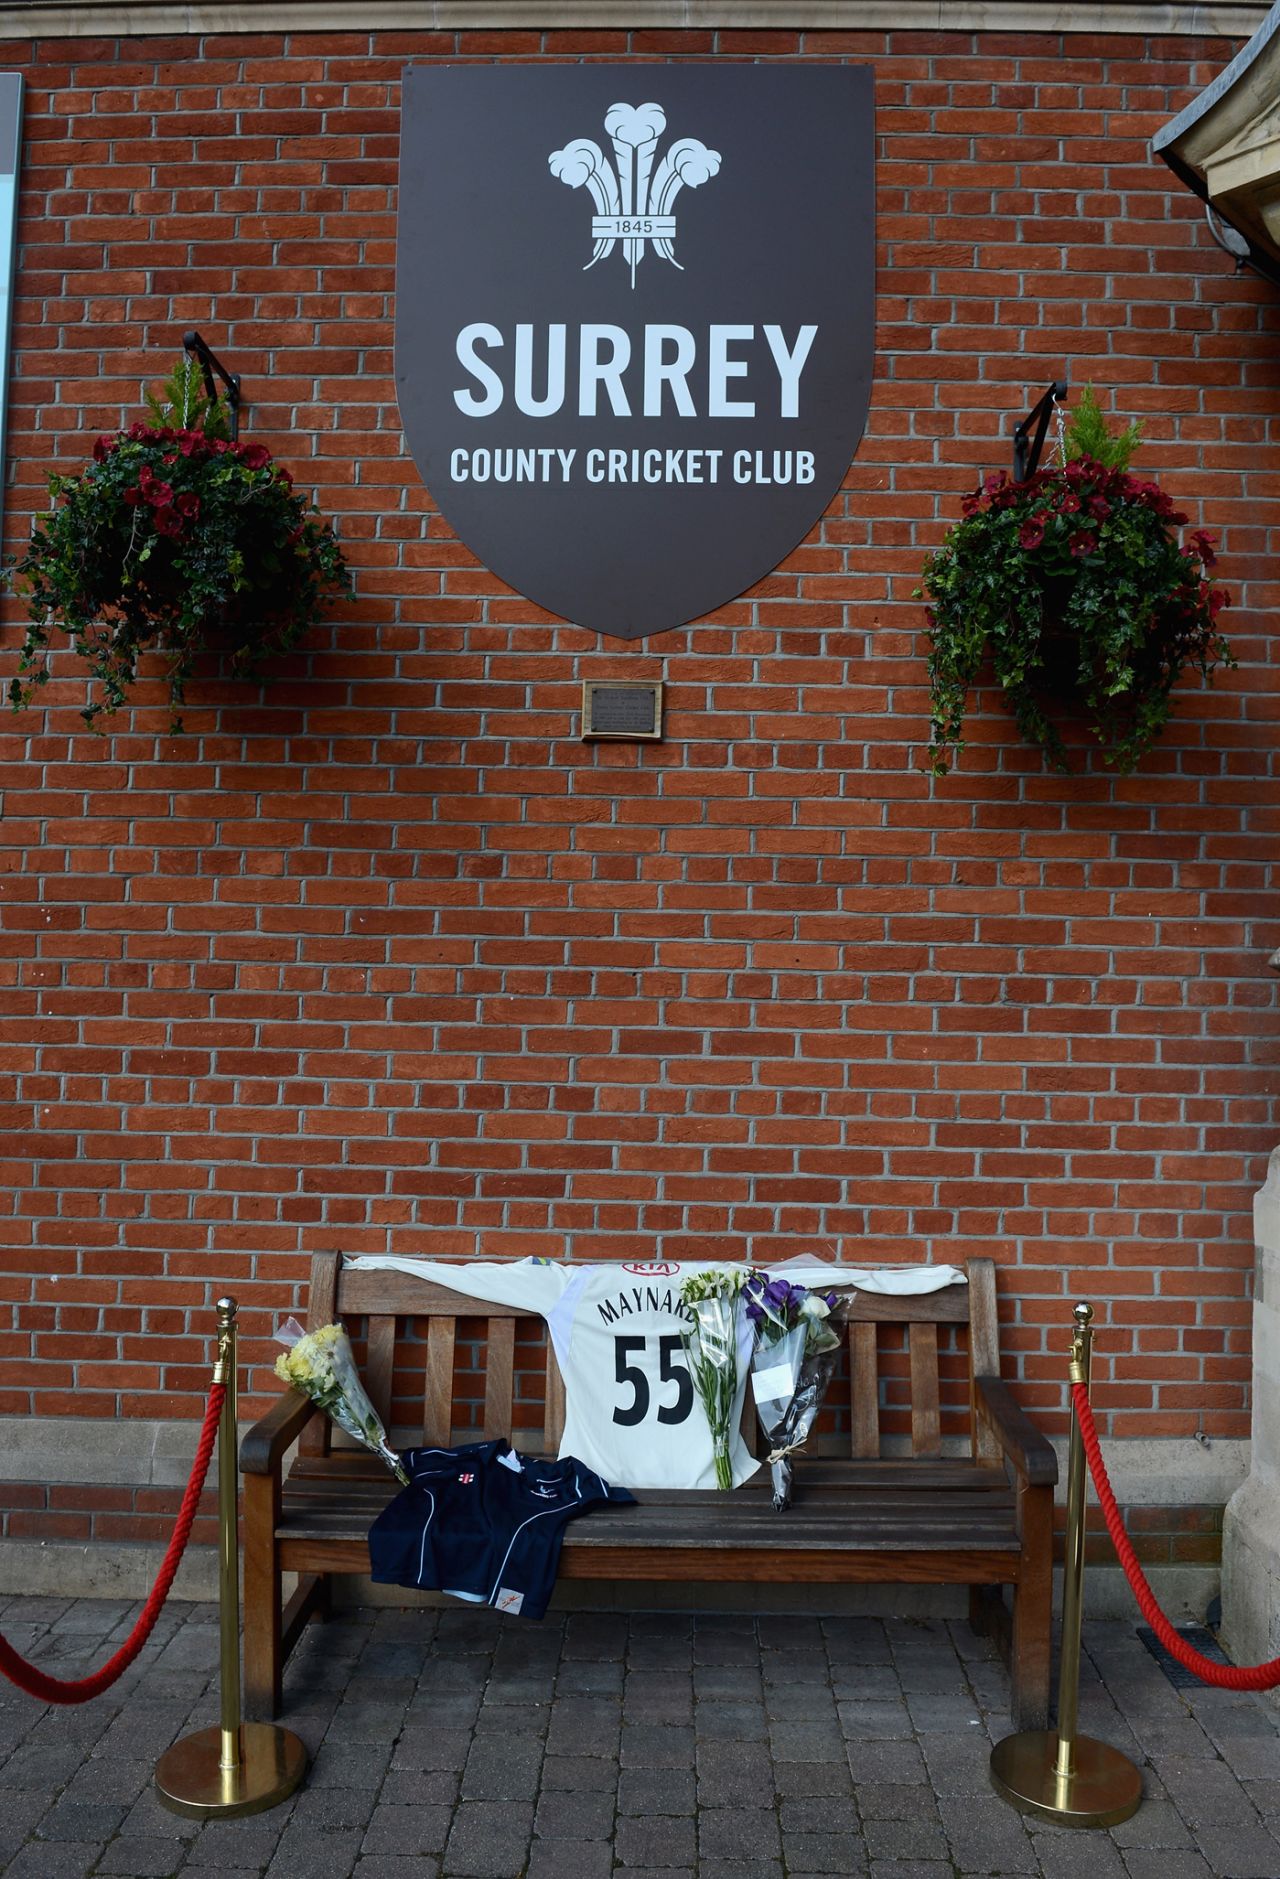 A bench displays tributes to Tom Maynard, The Oval, June 19, 2012